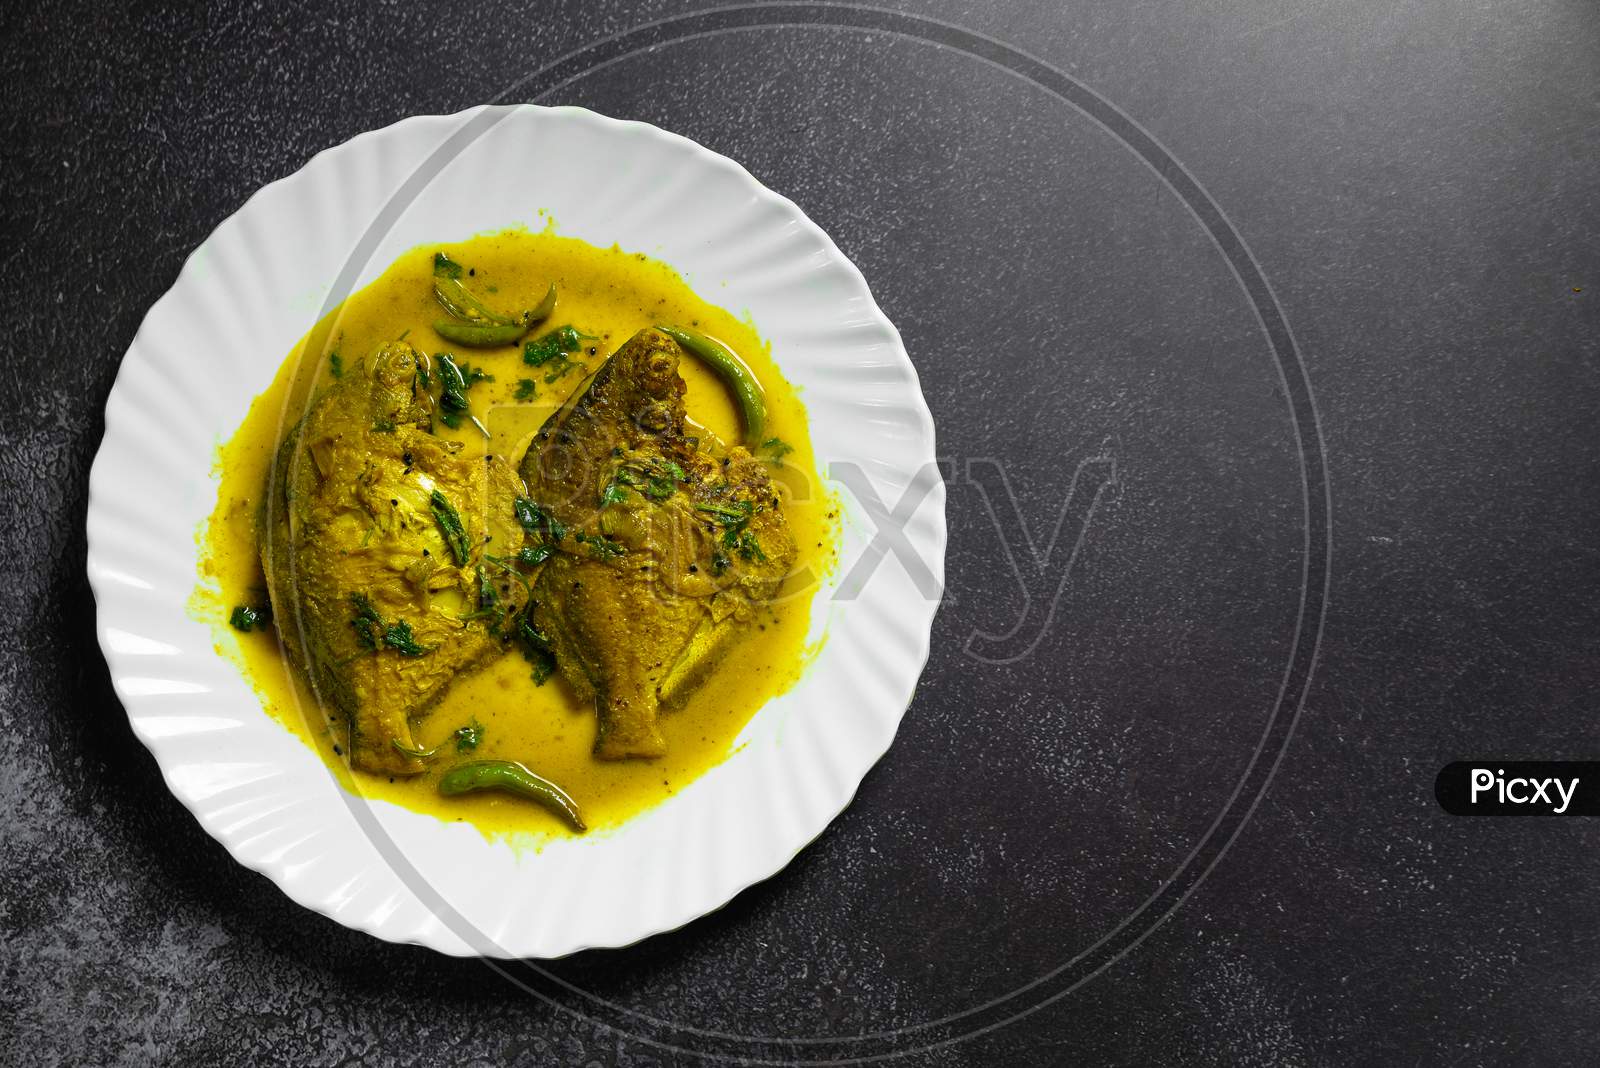 Pomfret In Mustard Gravy) Is An Authentic Bengali Recipe Which Is Made With Pomfret Fish.Pomfret Fish Curry, This Is A Traditional Bengali Homemade Dish.